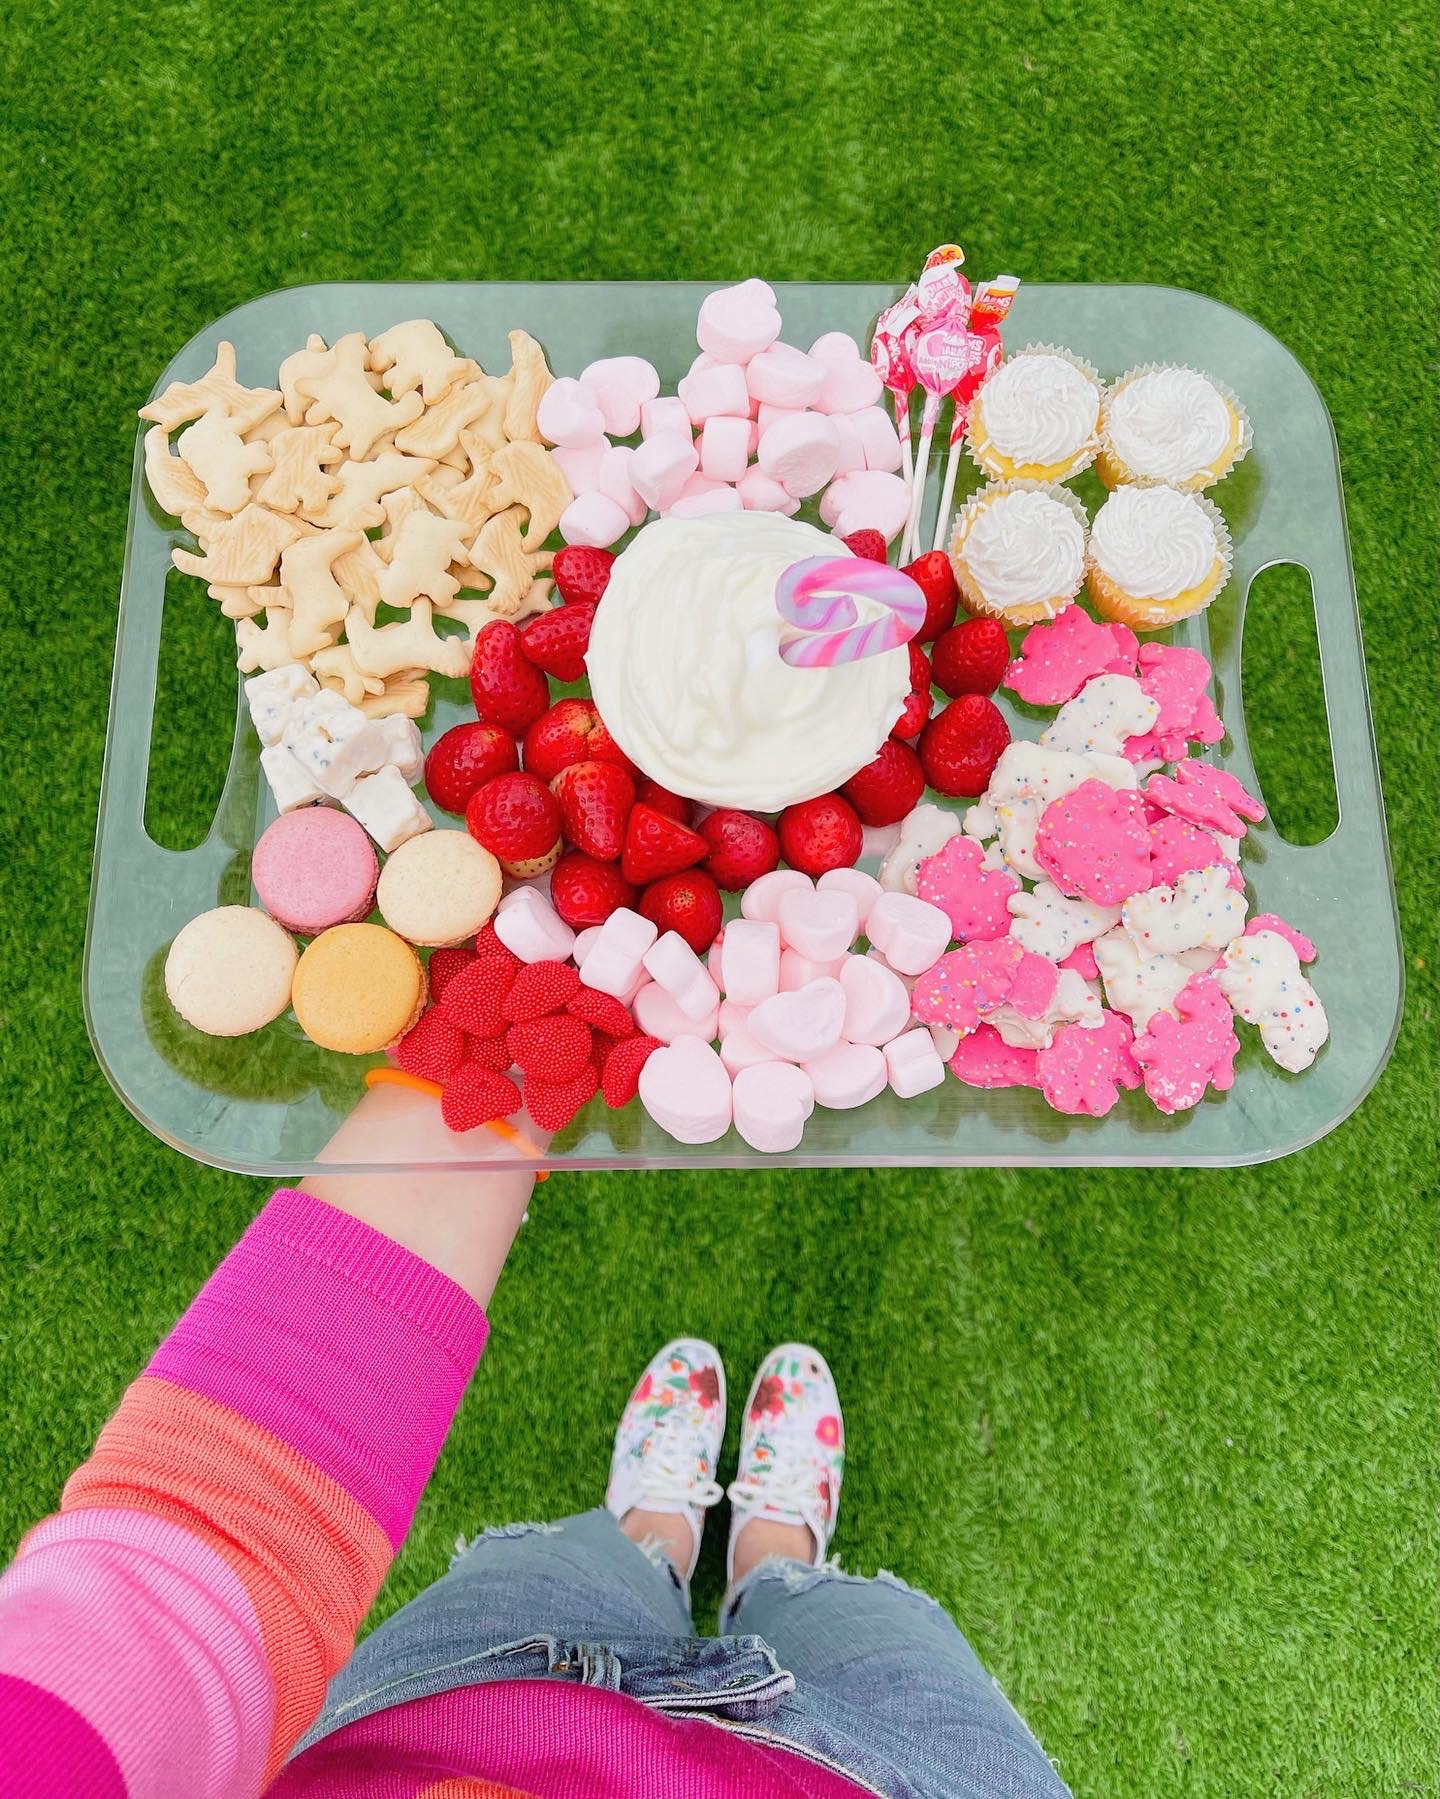 A Valentine's Day themed snack try with animal crackers, marshmallows, macarons, strawberries, and cupcakes